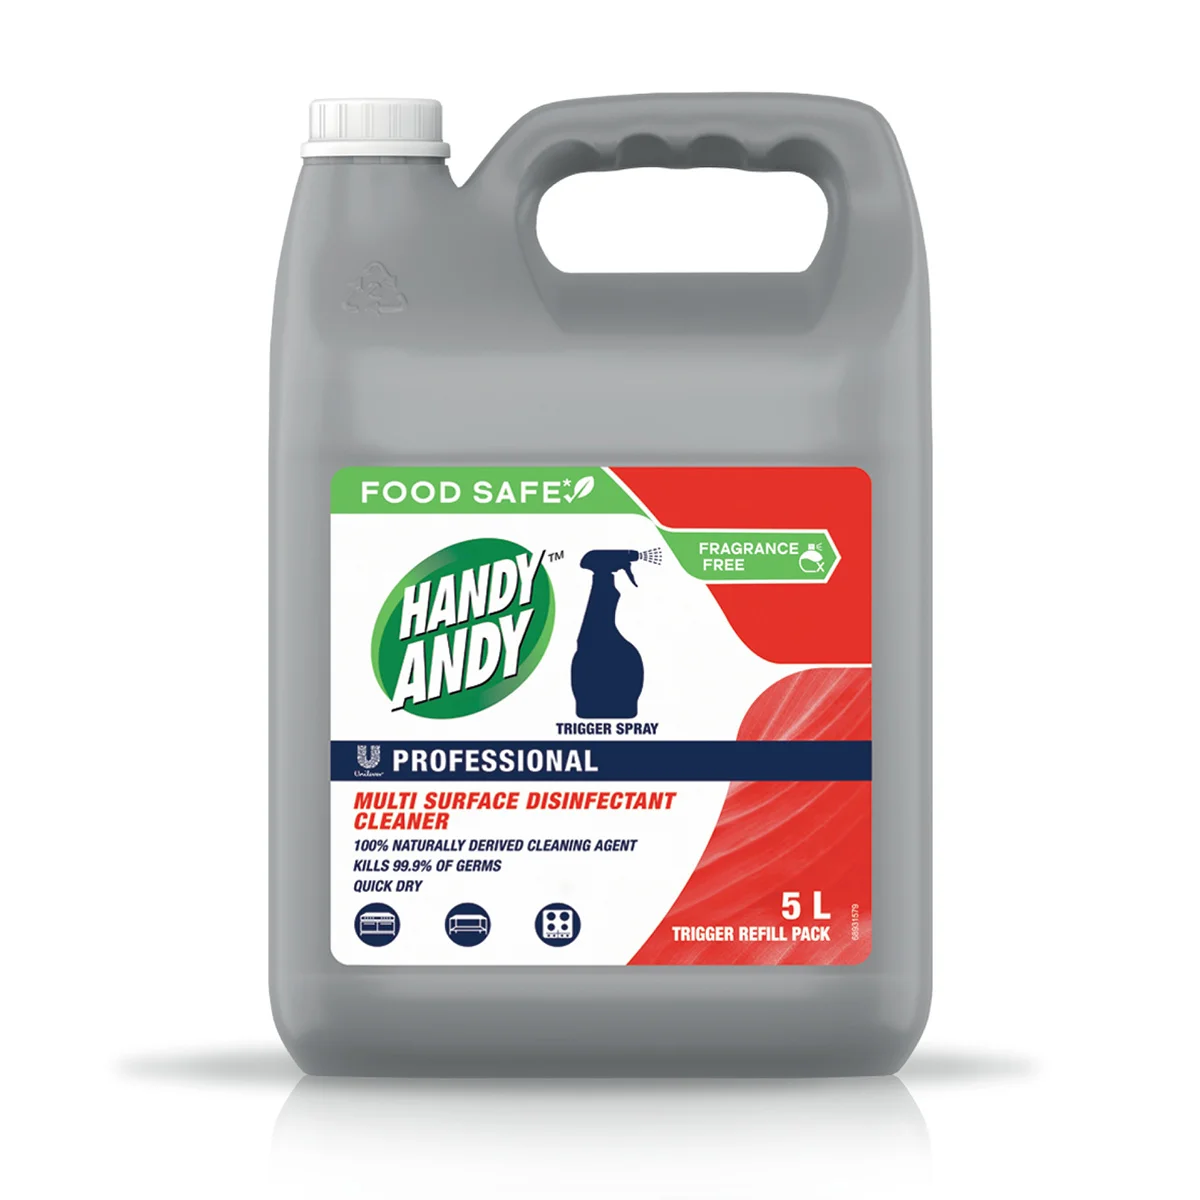 Handy Andy Professional Multi Surface Disinfectant Cleaner - 5 L